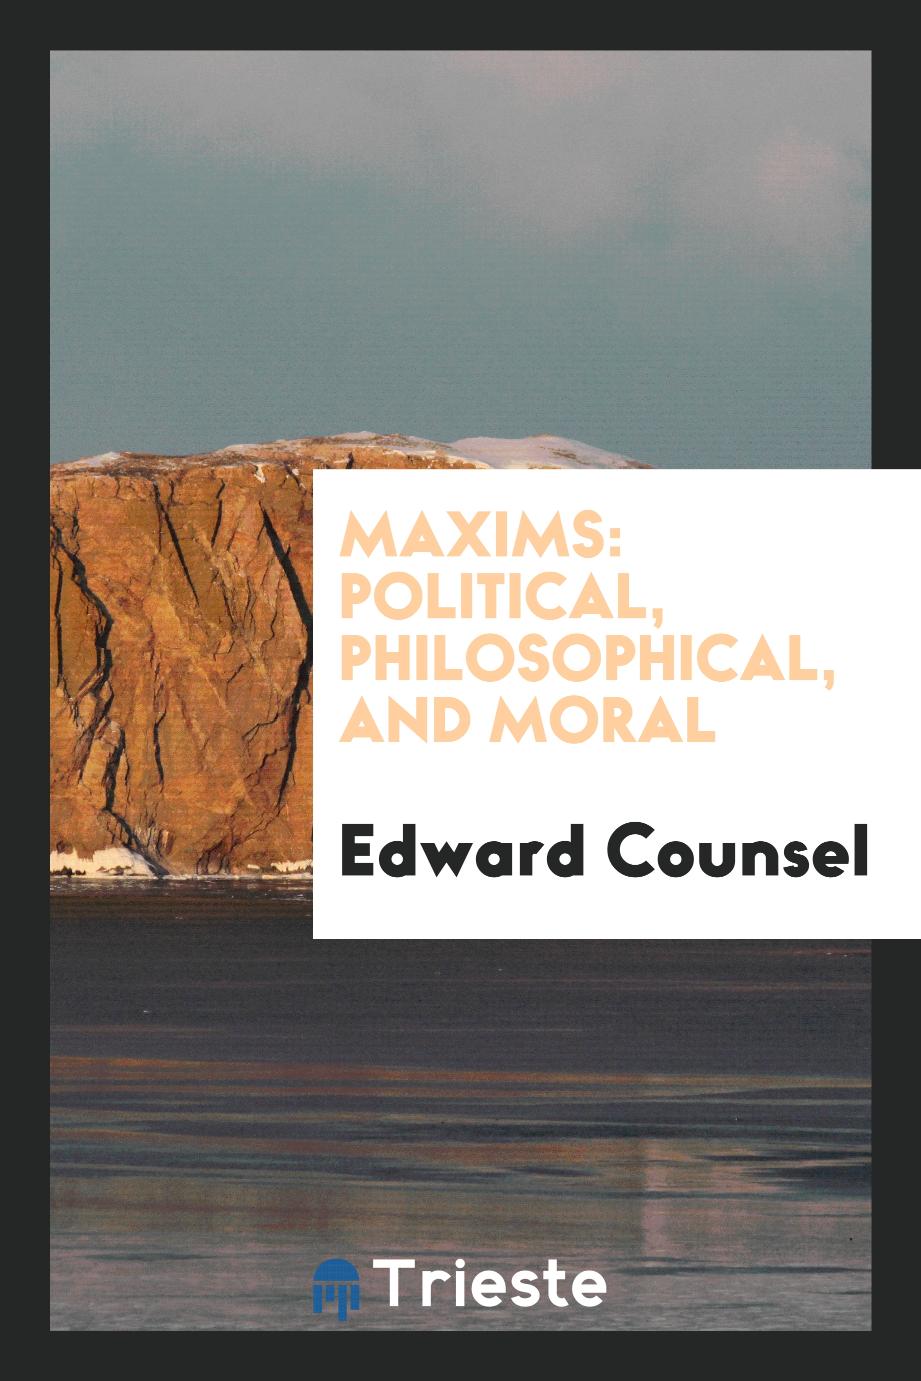 Maxims: political, philosophical, and moral